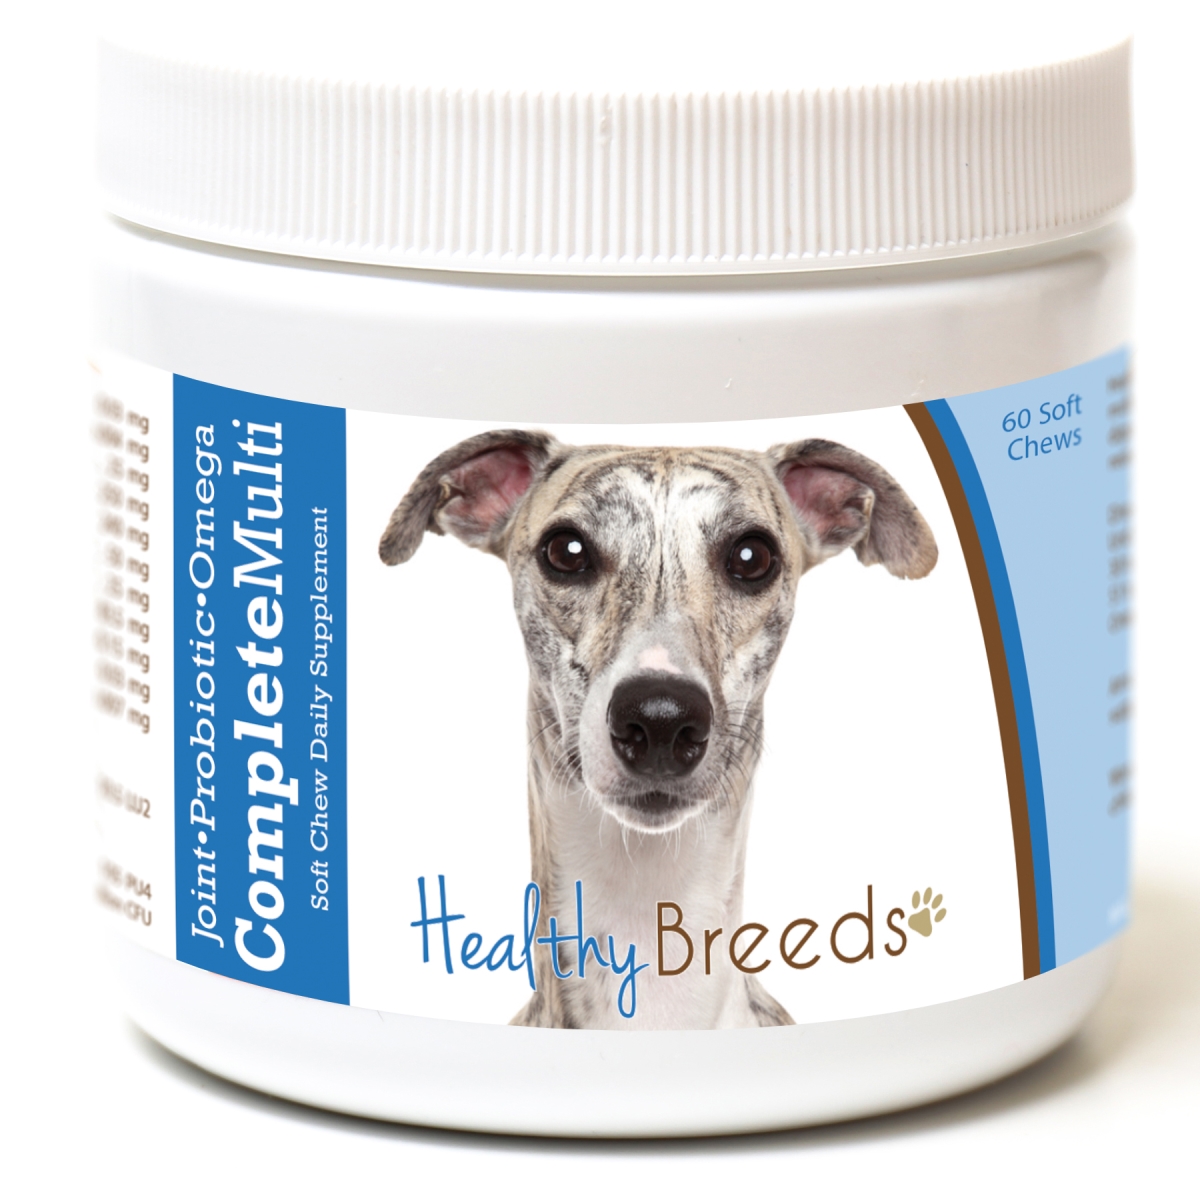 Picture of Healthy Breeds 192959009279 Whippet all in one Multivitamin Soft Chew - 60 Count